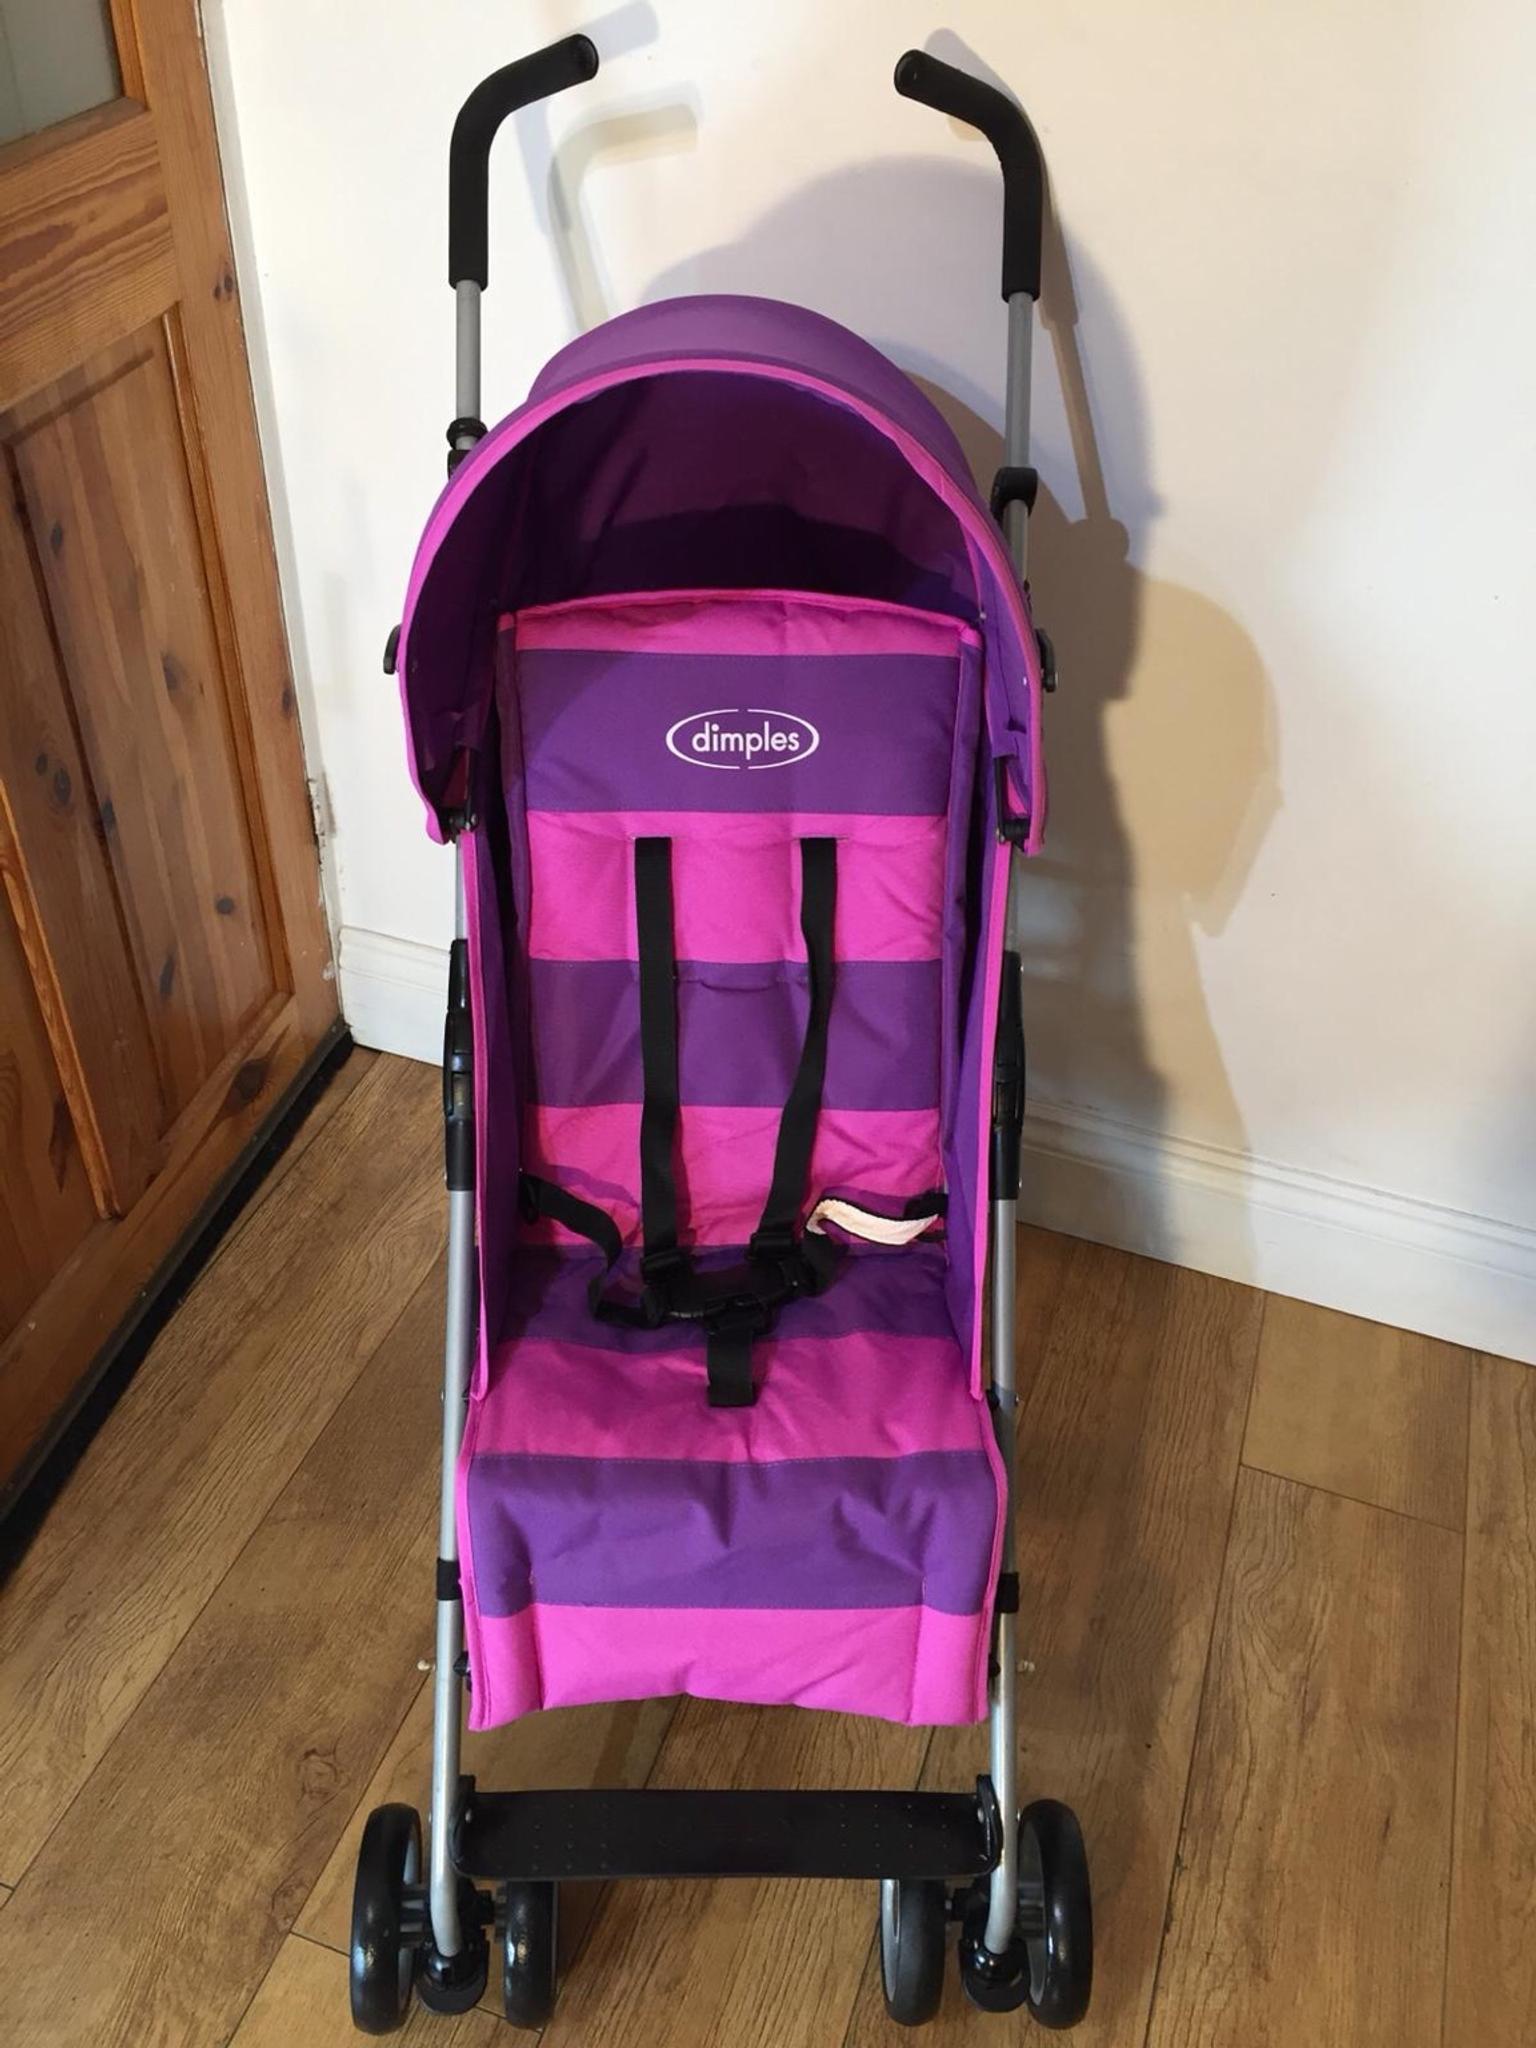 dimples layla stroller